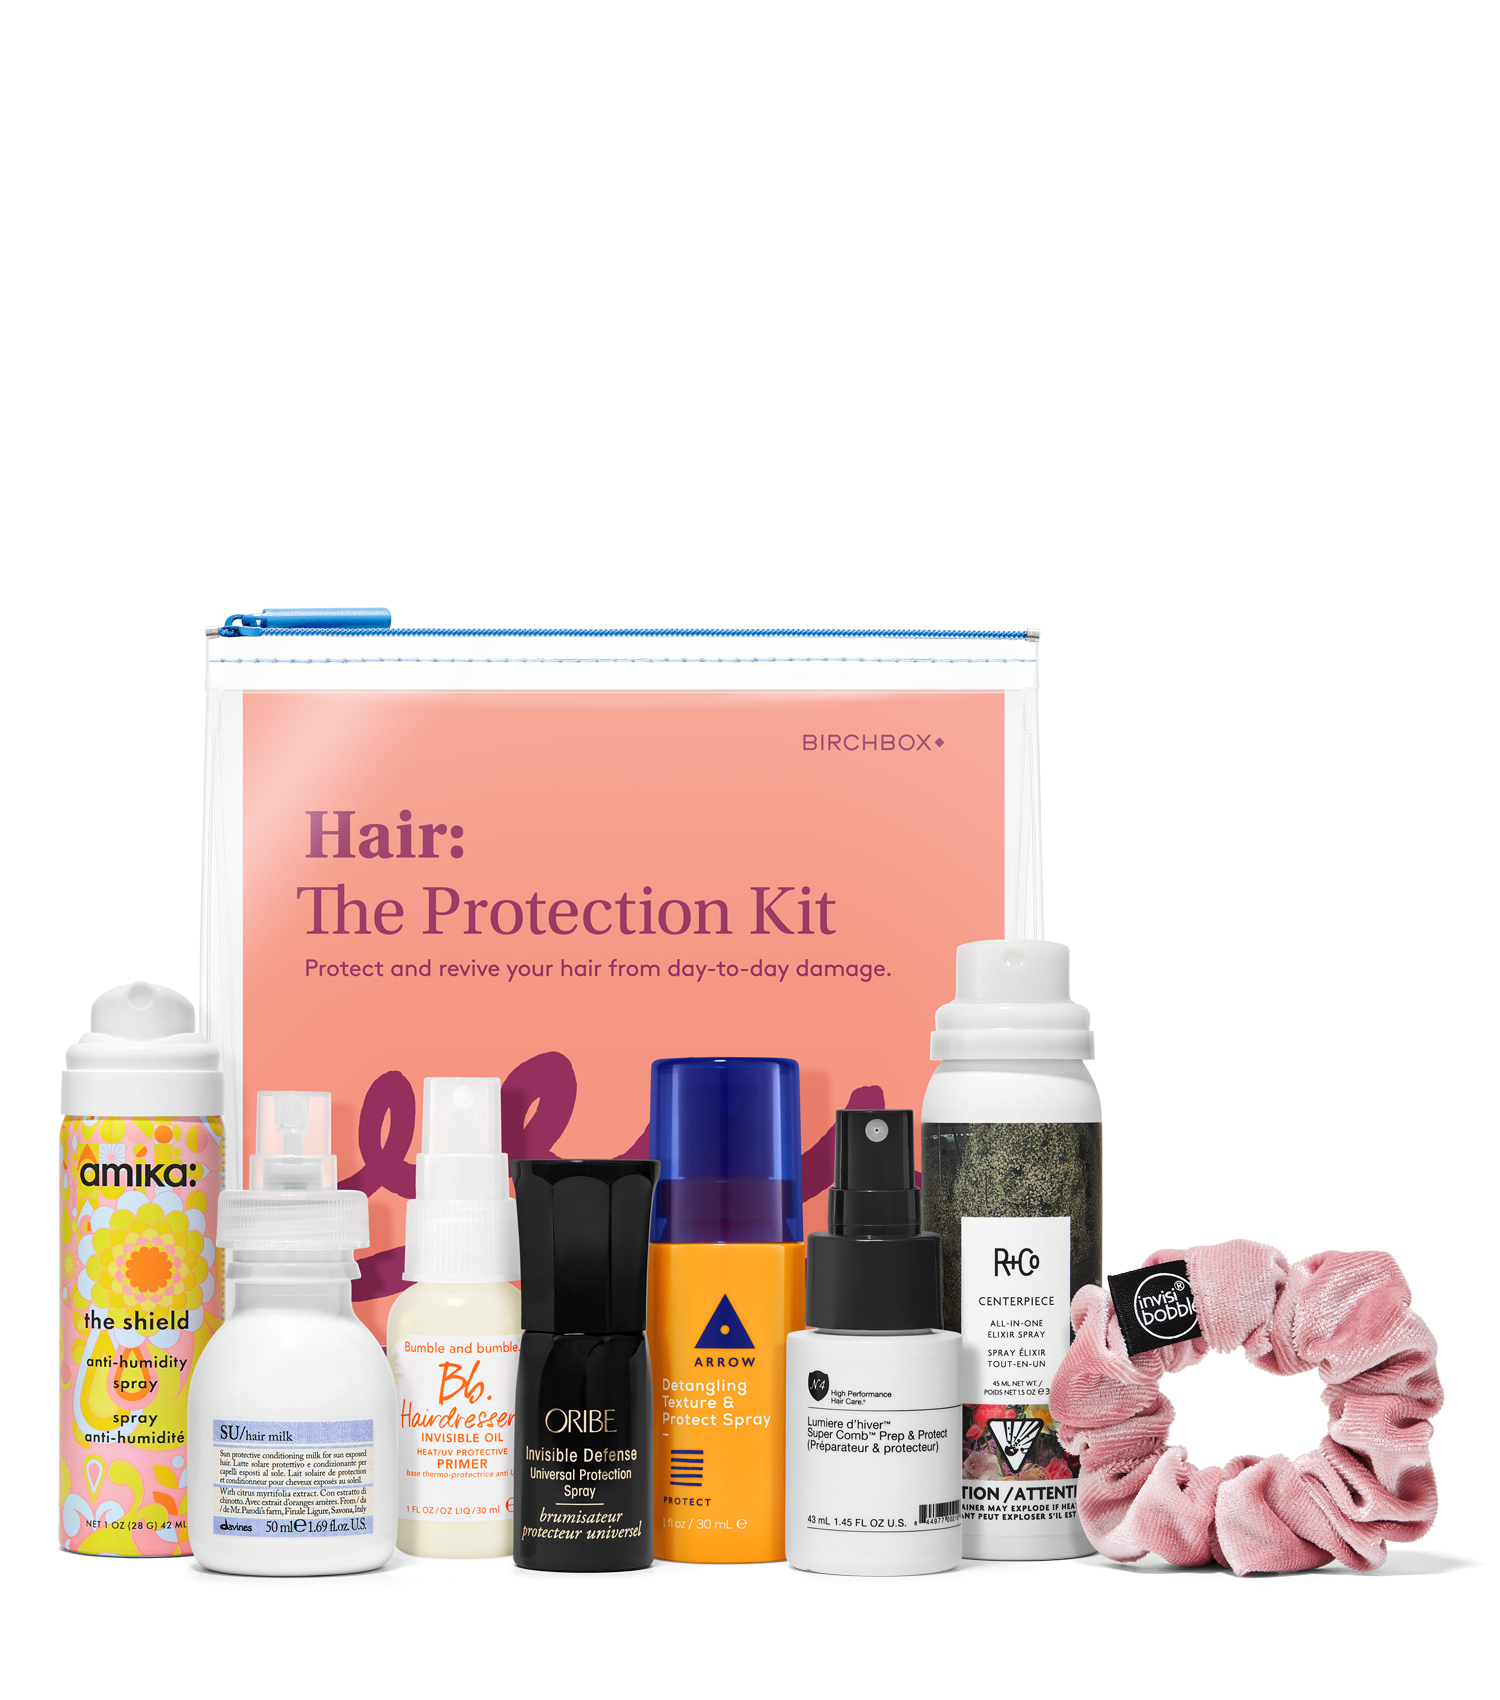 The Hair Protection Kit